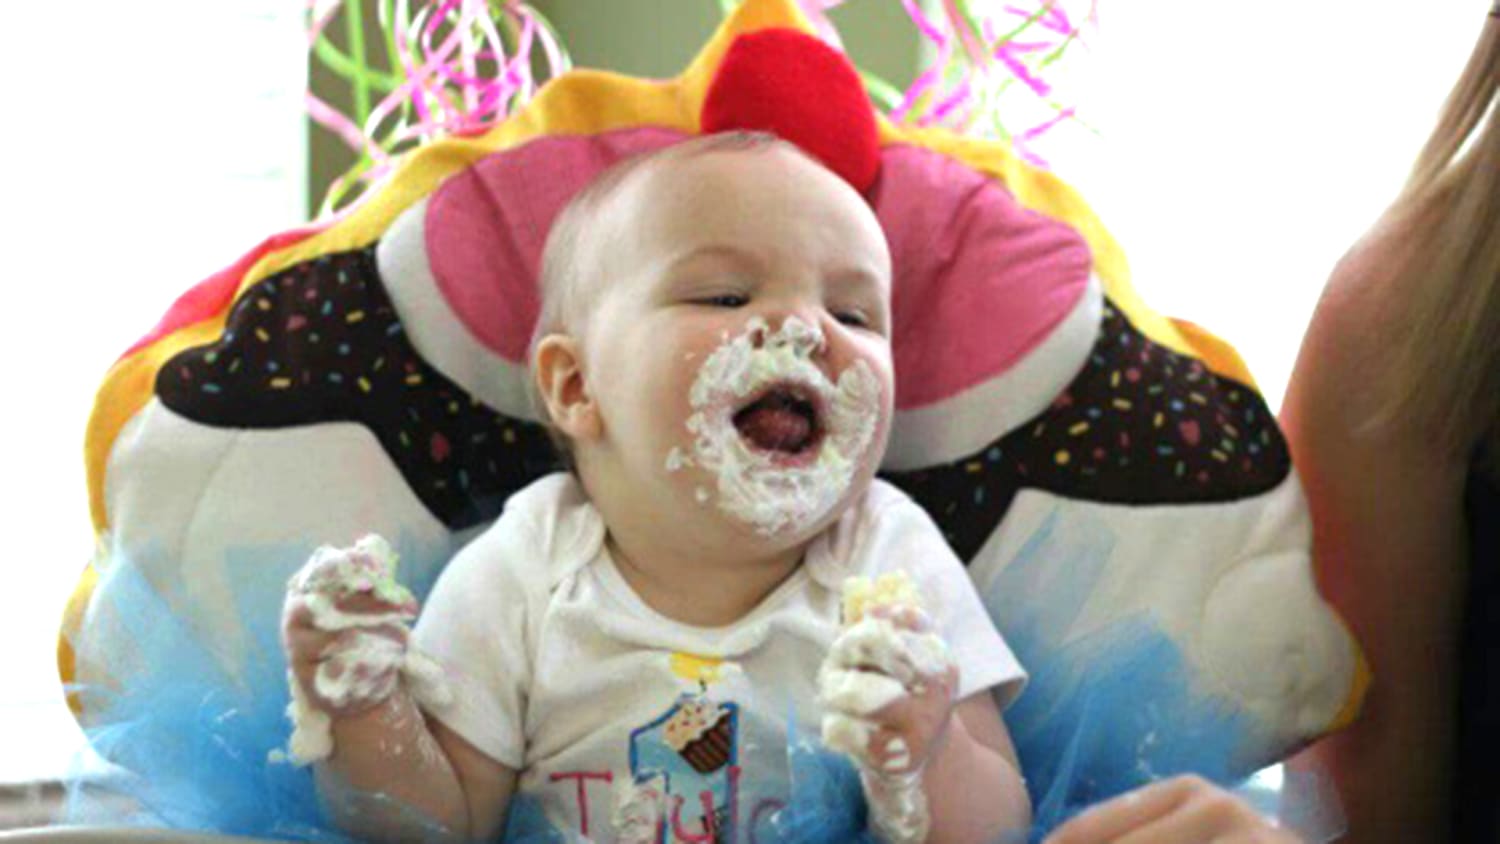 Parents share funny birthday cake photos as kids turn 1